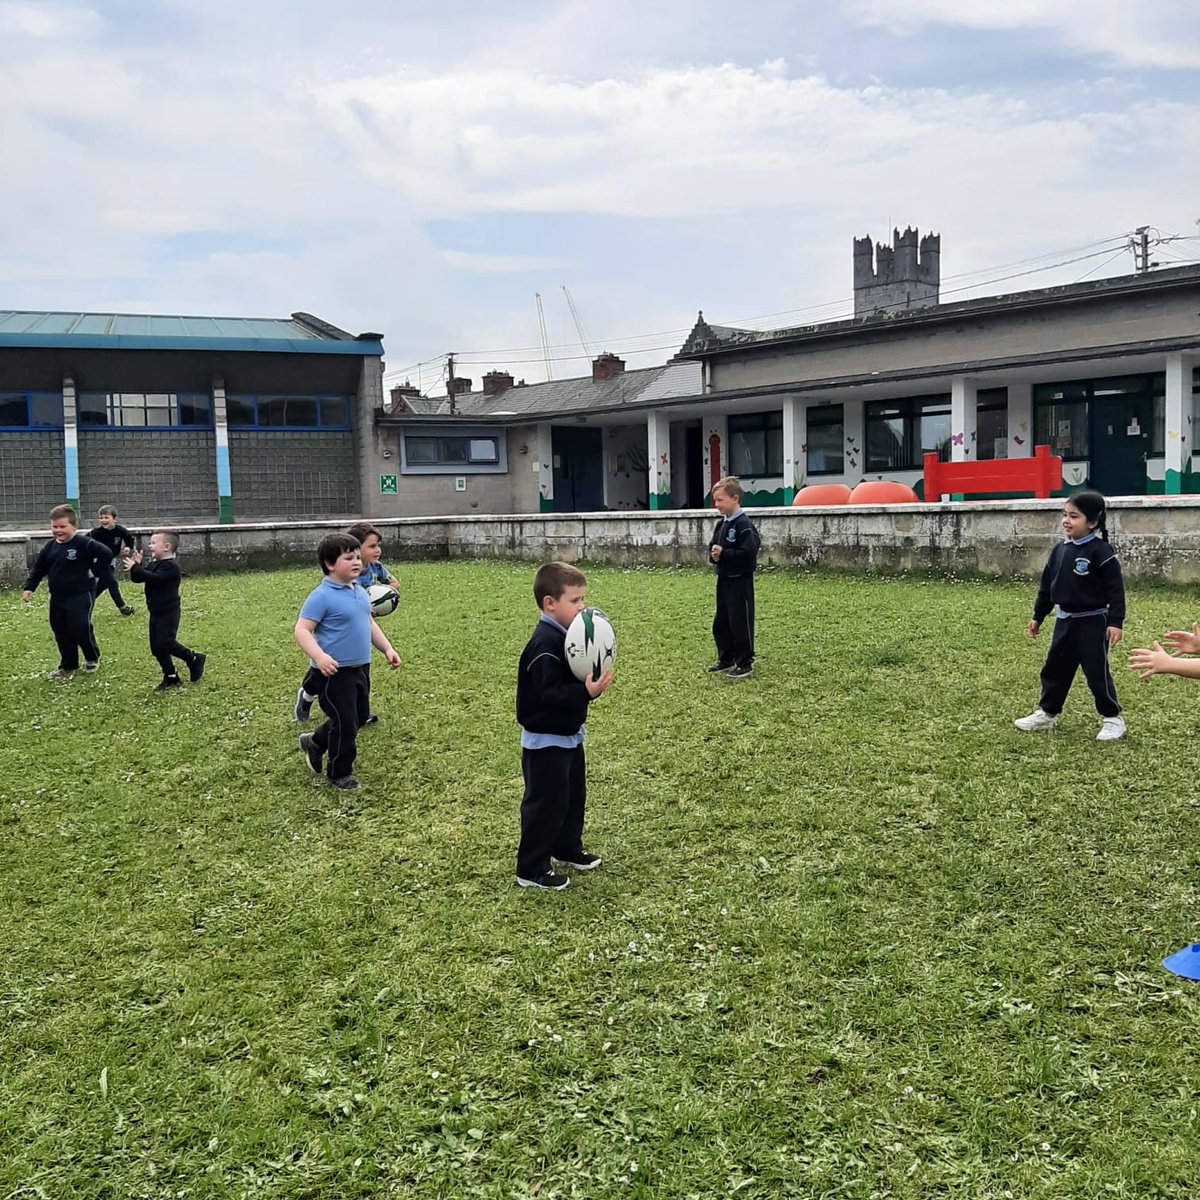 Junior Infants had their first taste of rugby today with @KennethMcNama15 from @Munsterrugby. Mr O'Byrne is looking forward to seeing lots of new recruits in @MarysRFC in September 💪🏻💪🏻💪🏻🏉🏉🏉 #Rugby #BeActive